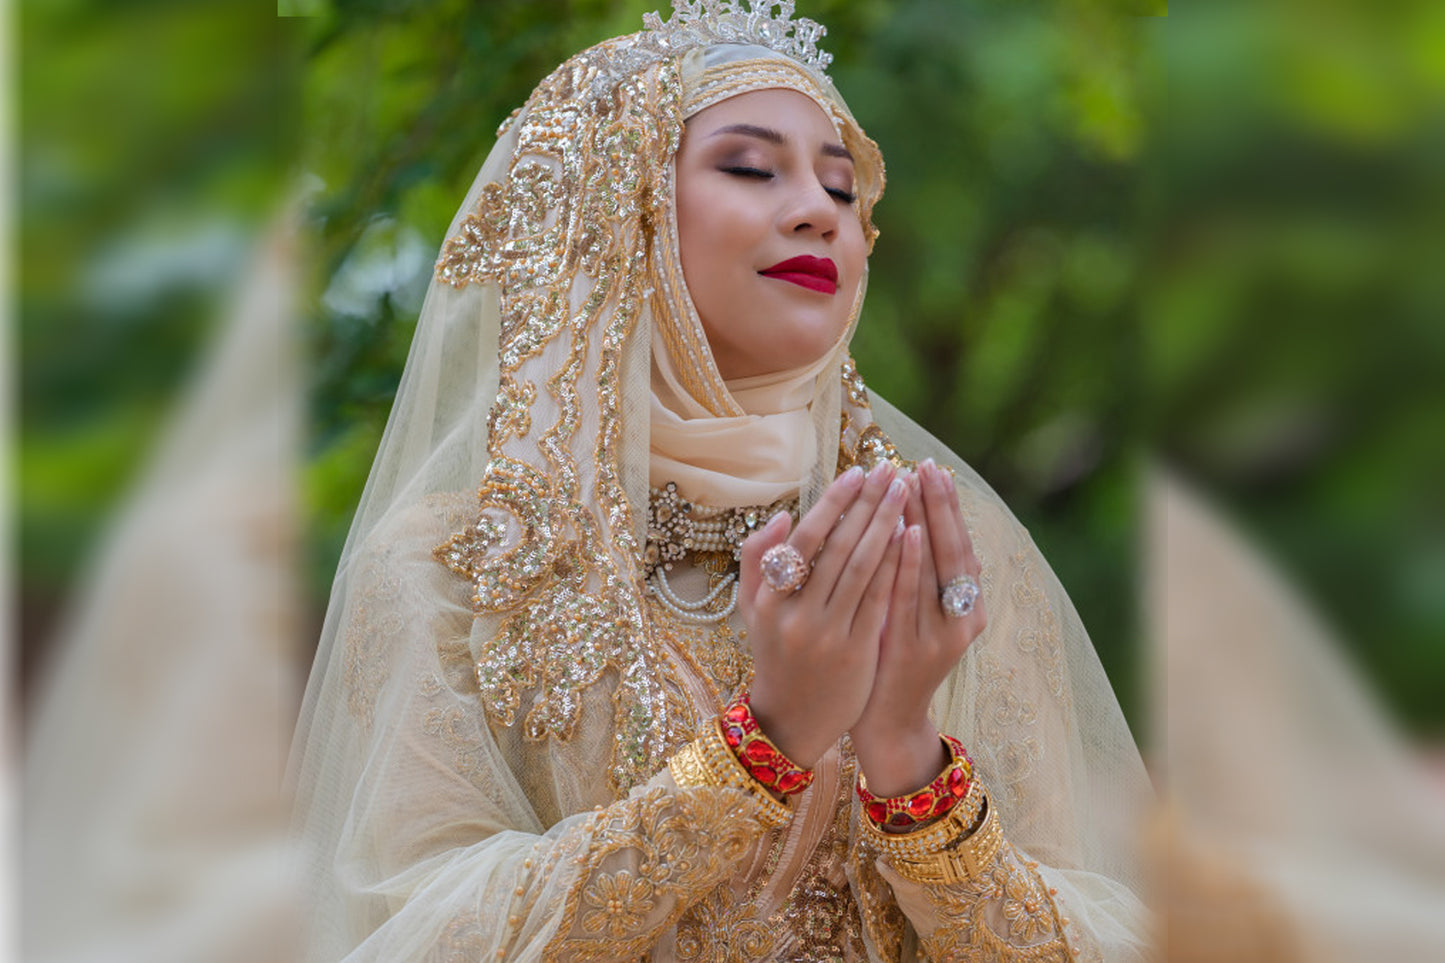 Wear This Traditional Jewellery for your Wedding